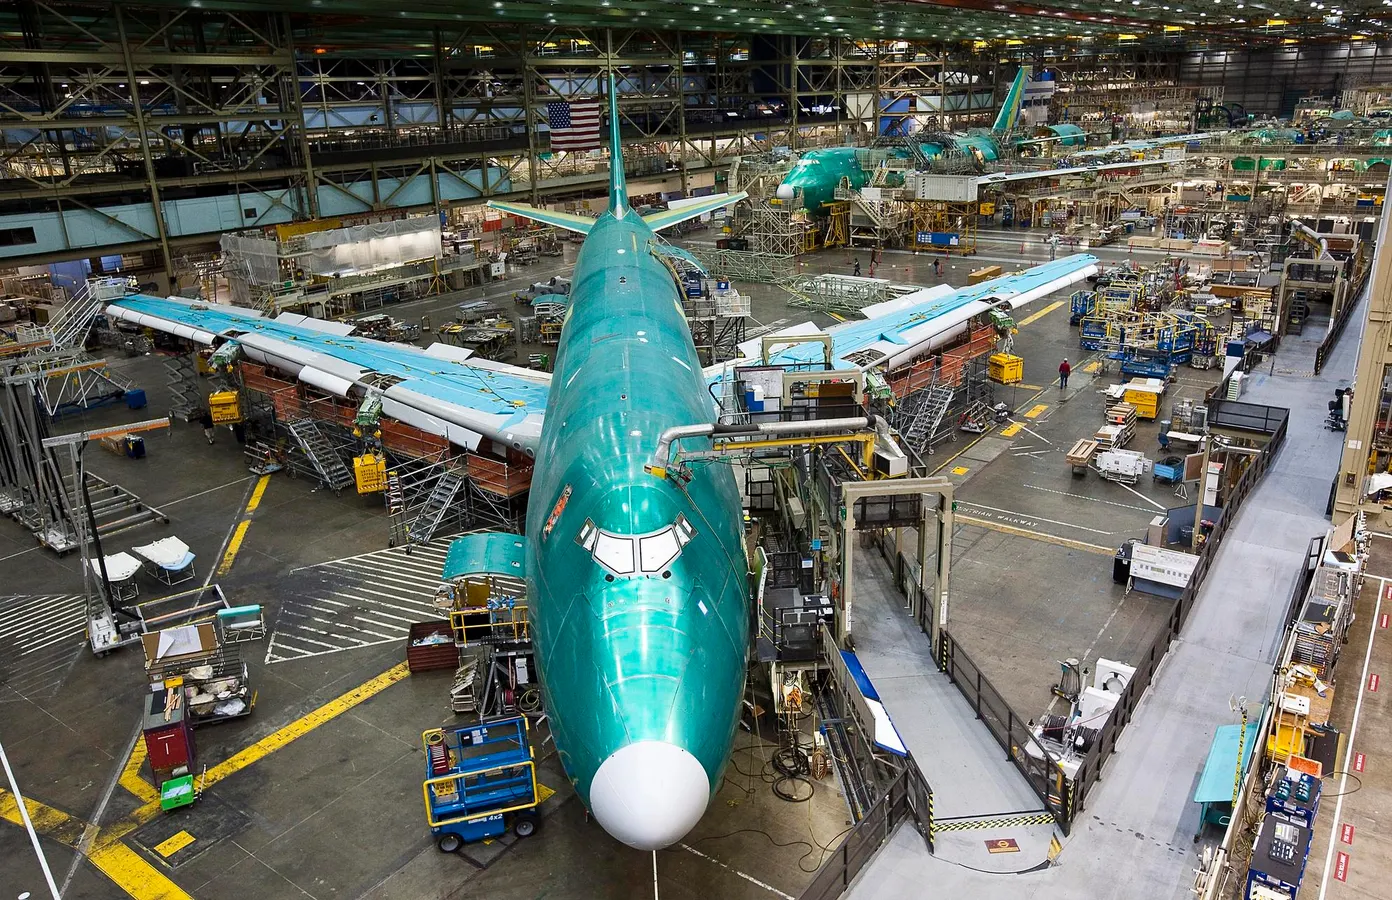 Boeing's Big Shake-Up Firefighter Lockout and Cyber Threats Spark Safety and Security Fears---